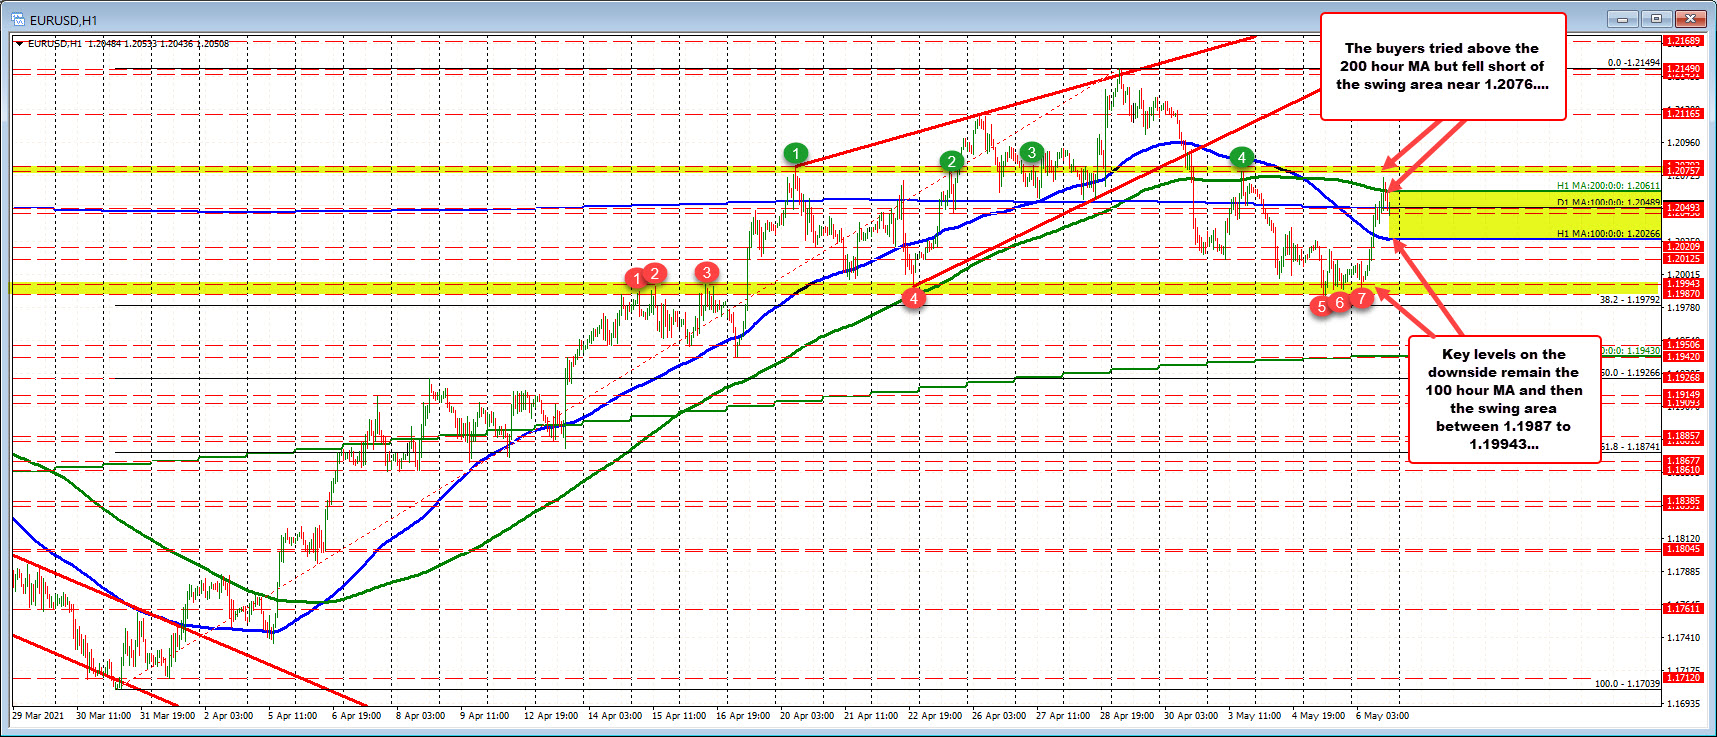 High for the day extends above 200 hour MA but rally fizzles out